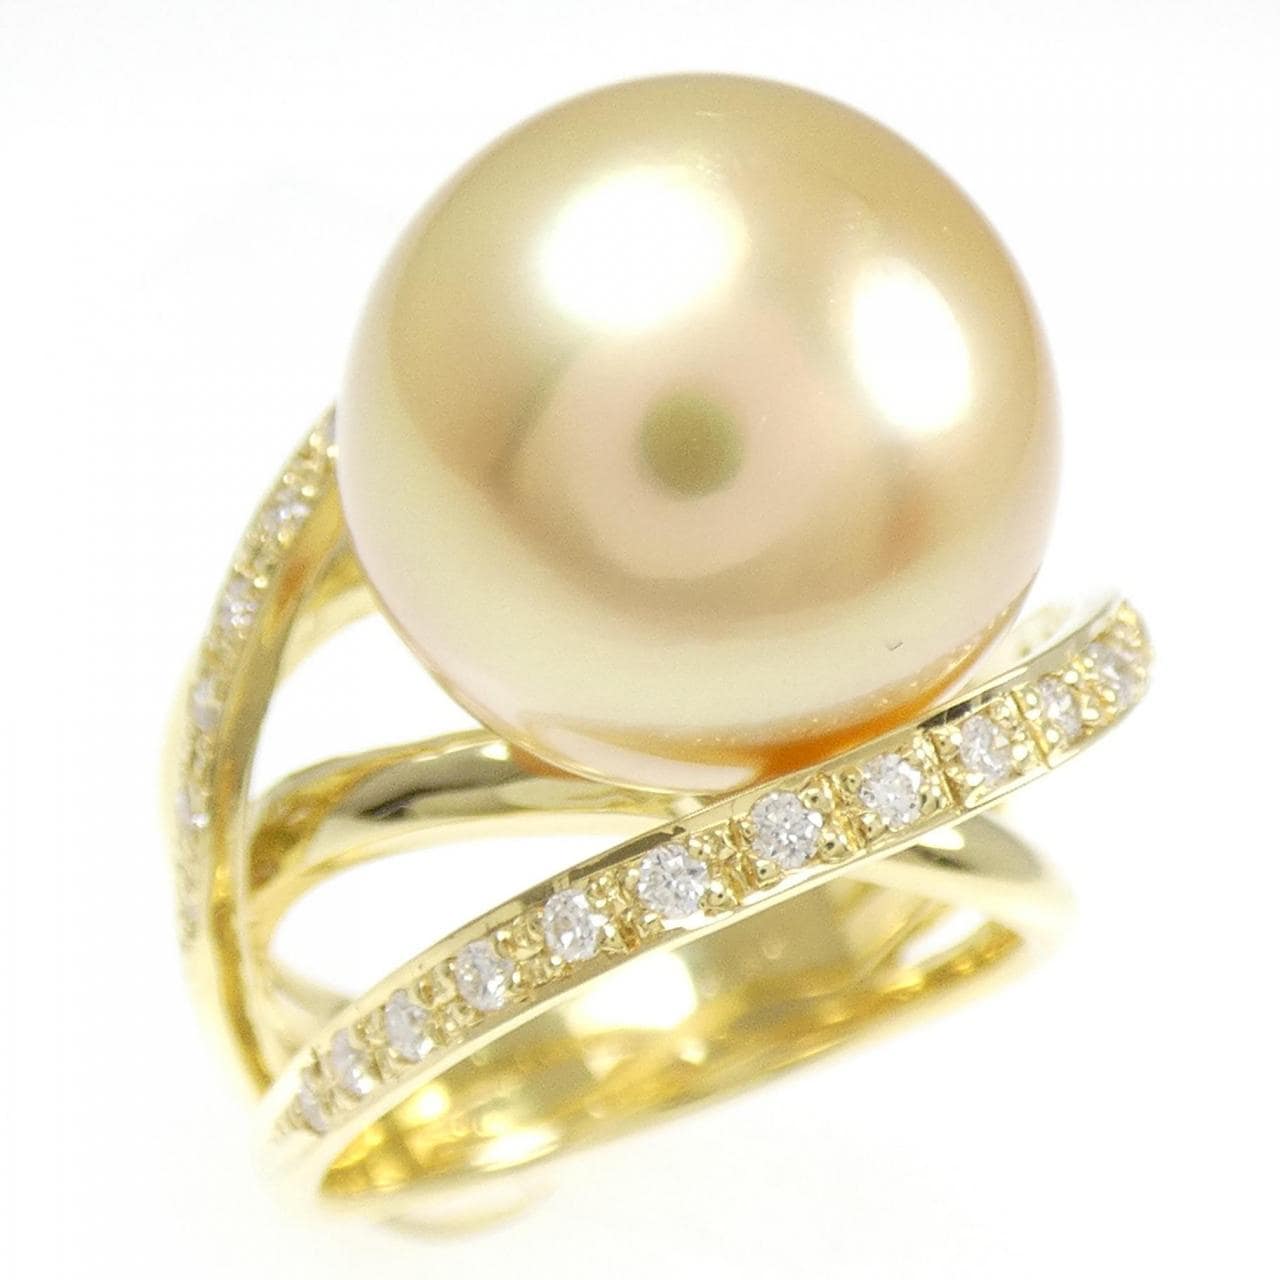 K18YG White Butterfly Pearl ring 13.7mm